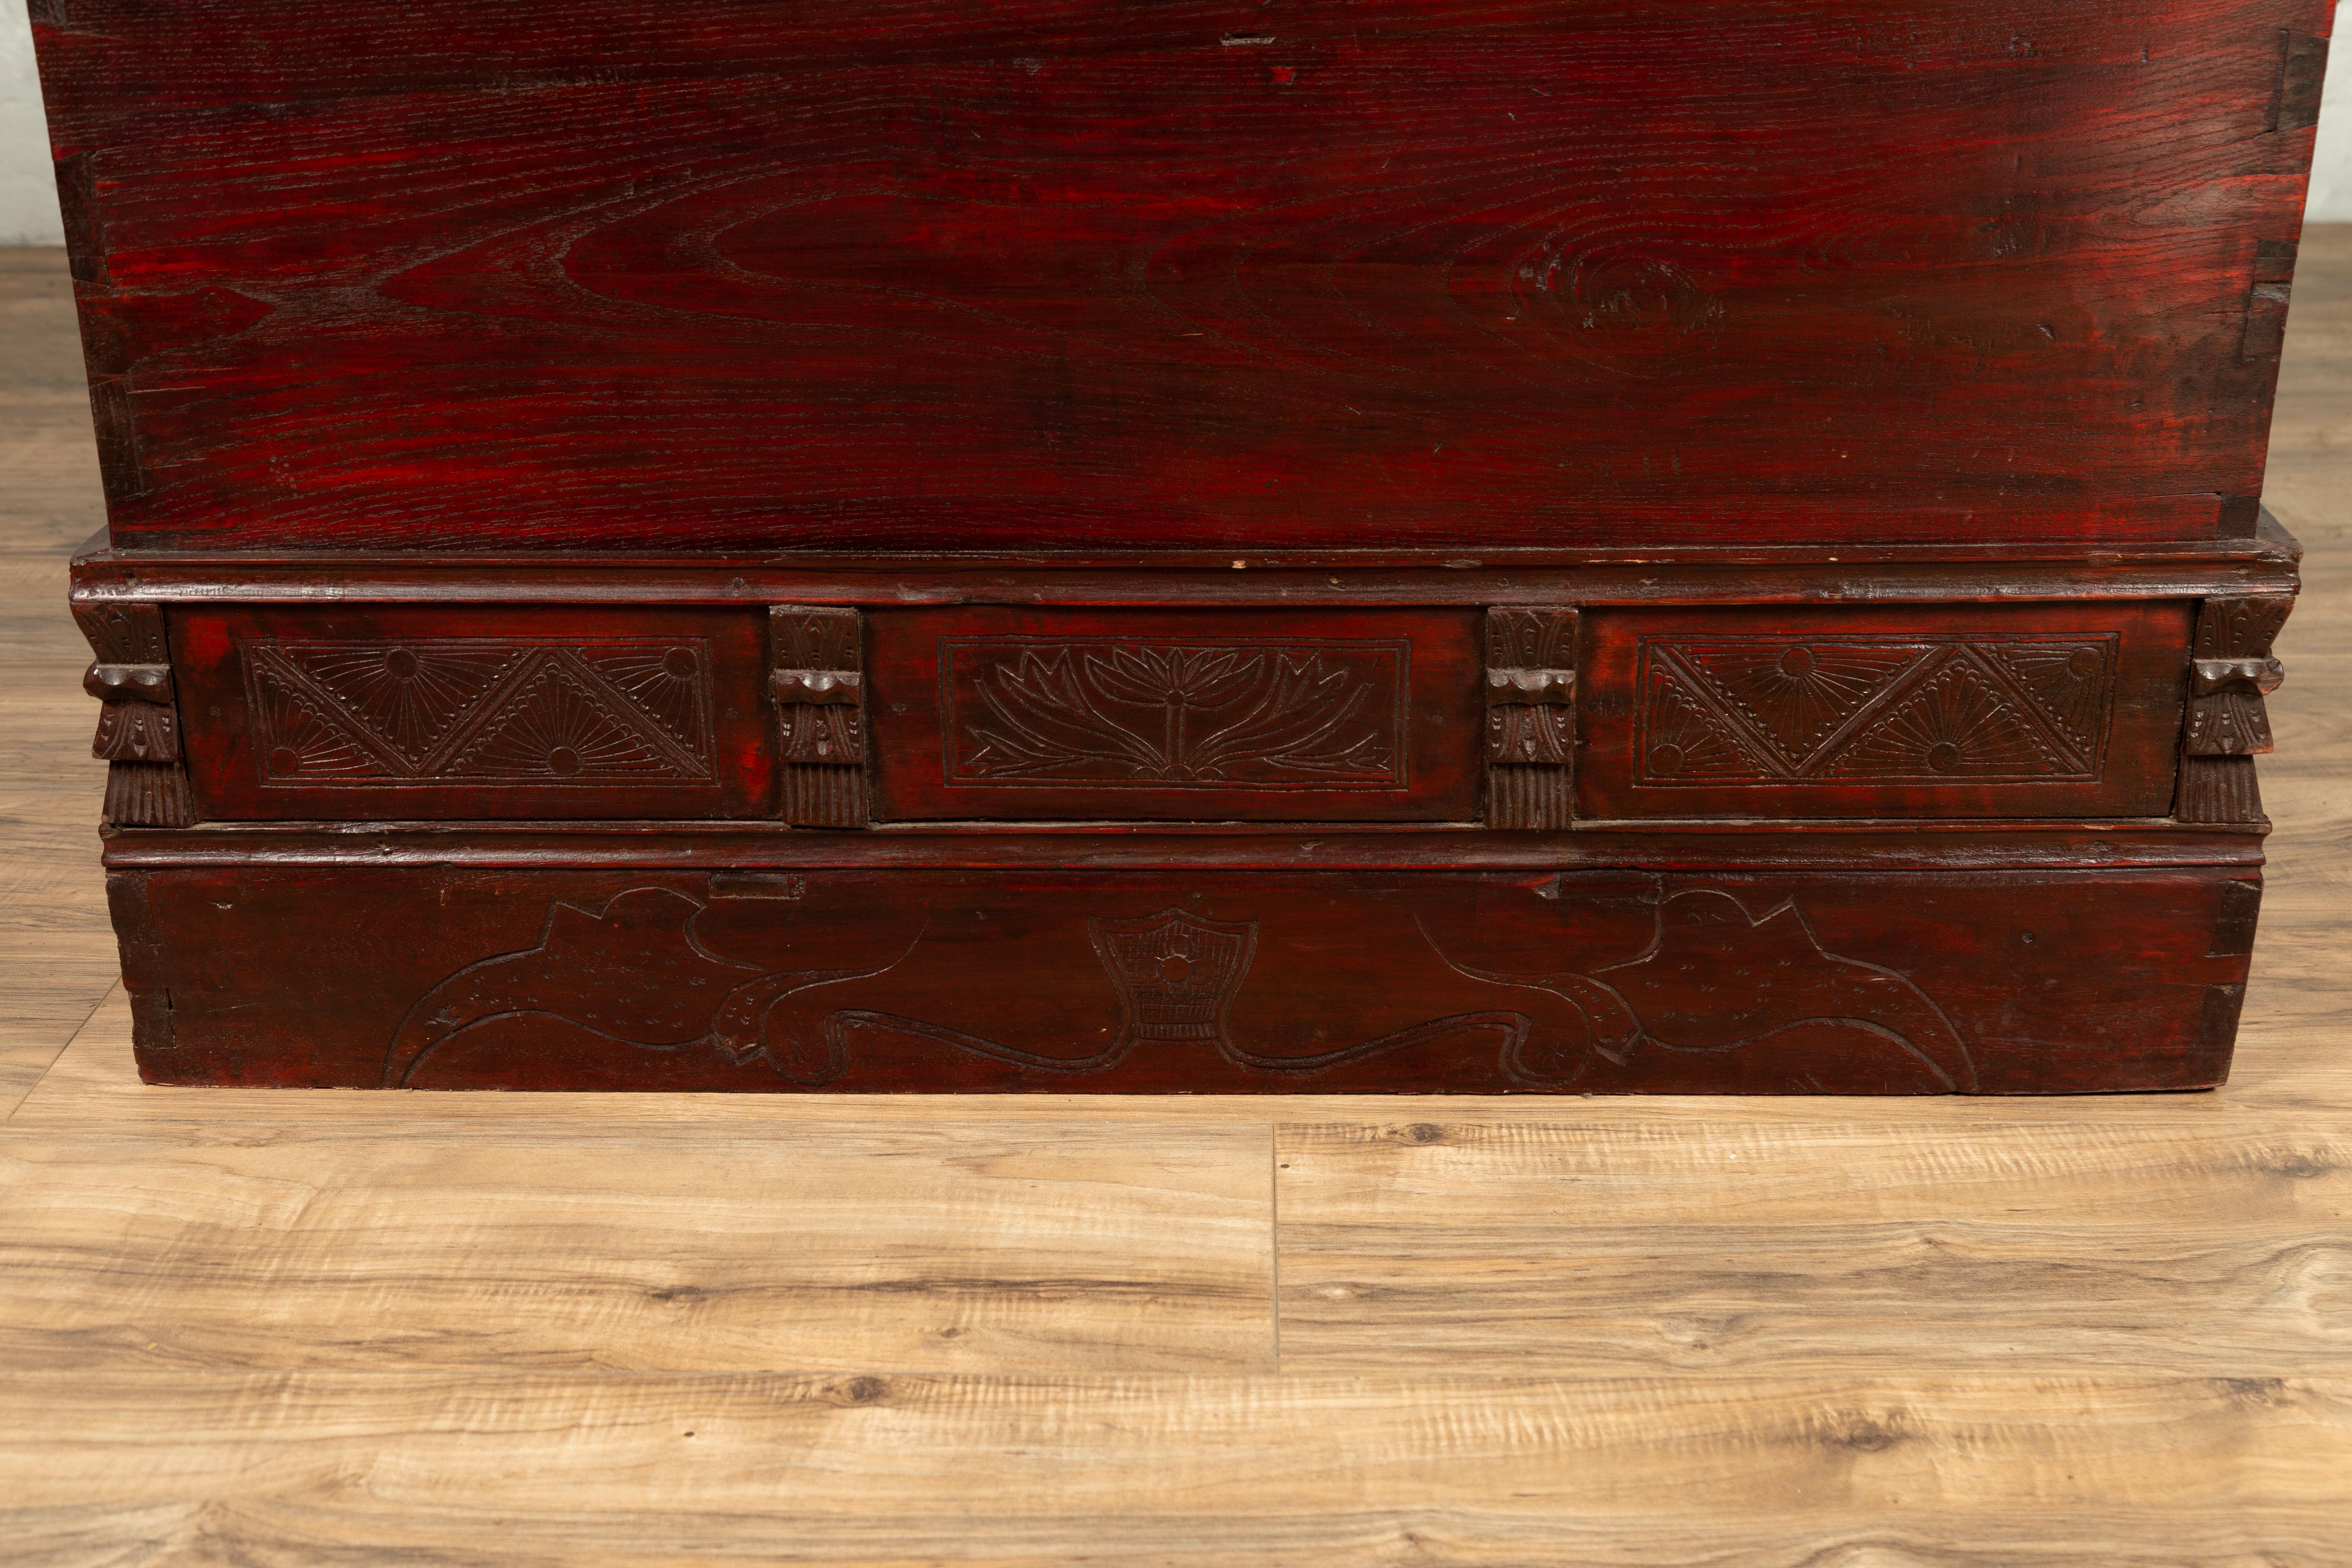 Wood Chinese Antique Red Lacquered Trunk with Incised and Carved Motifs and Handles